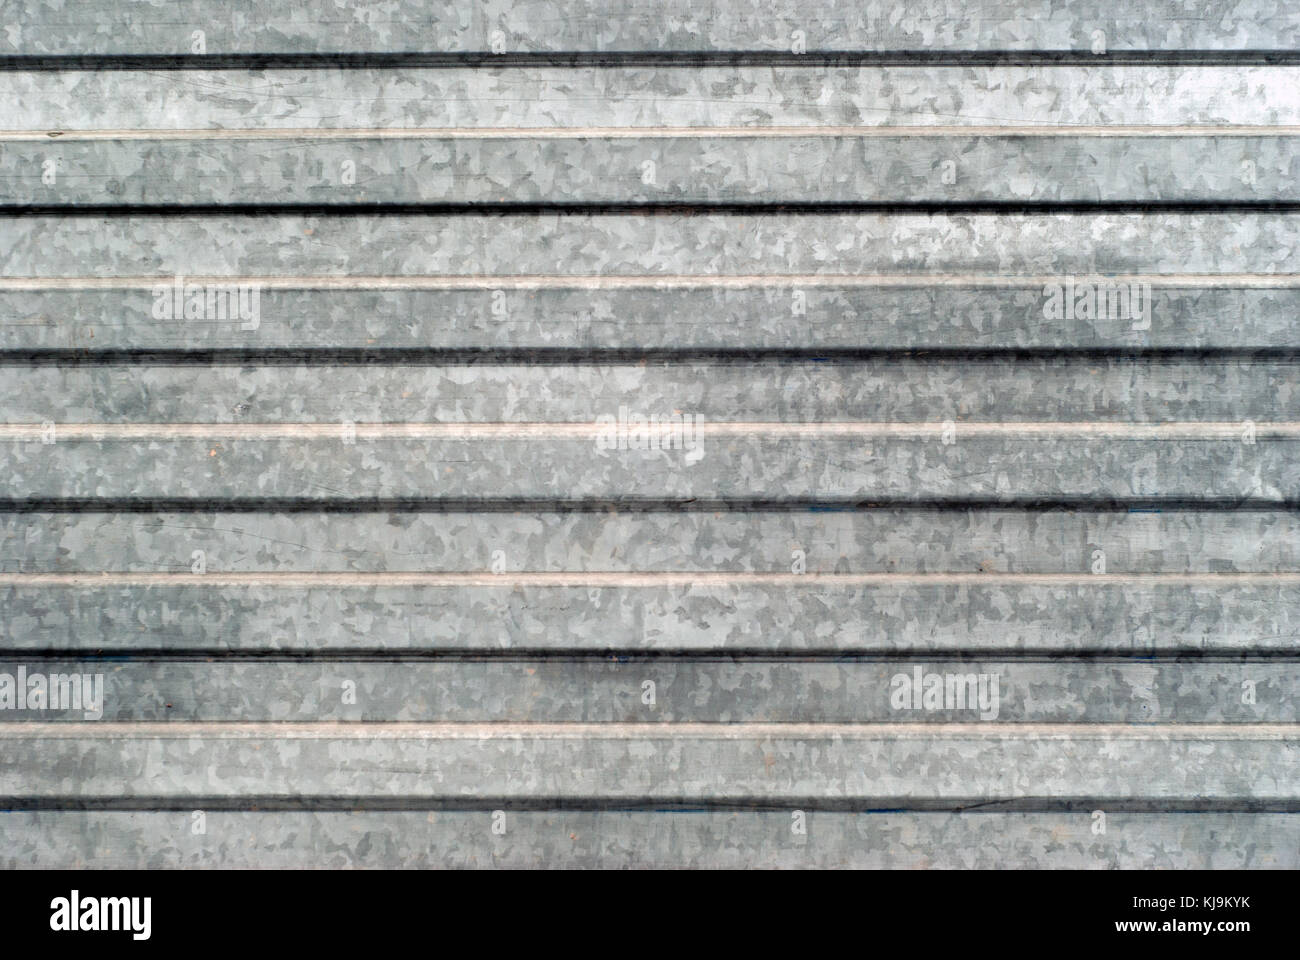 Galvanized Sheet Metal High Resolution Stock Photography And Images Alamy